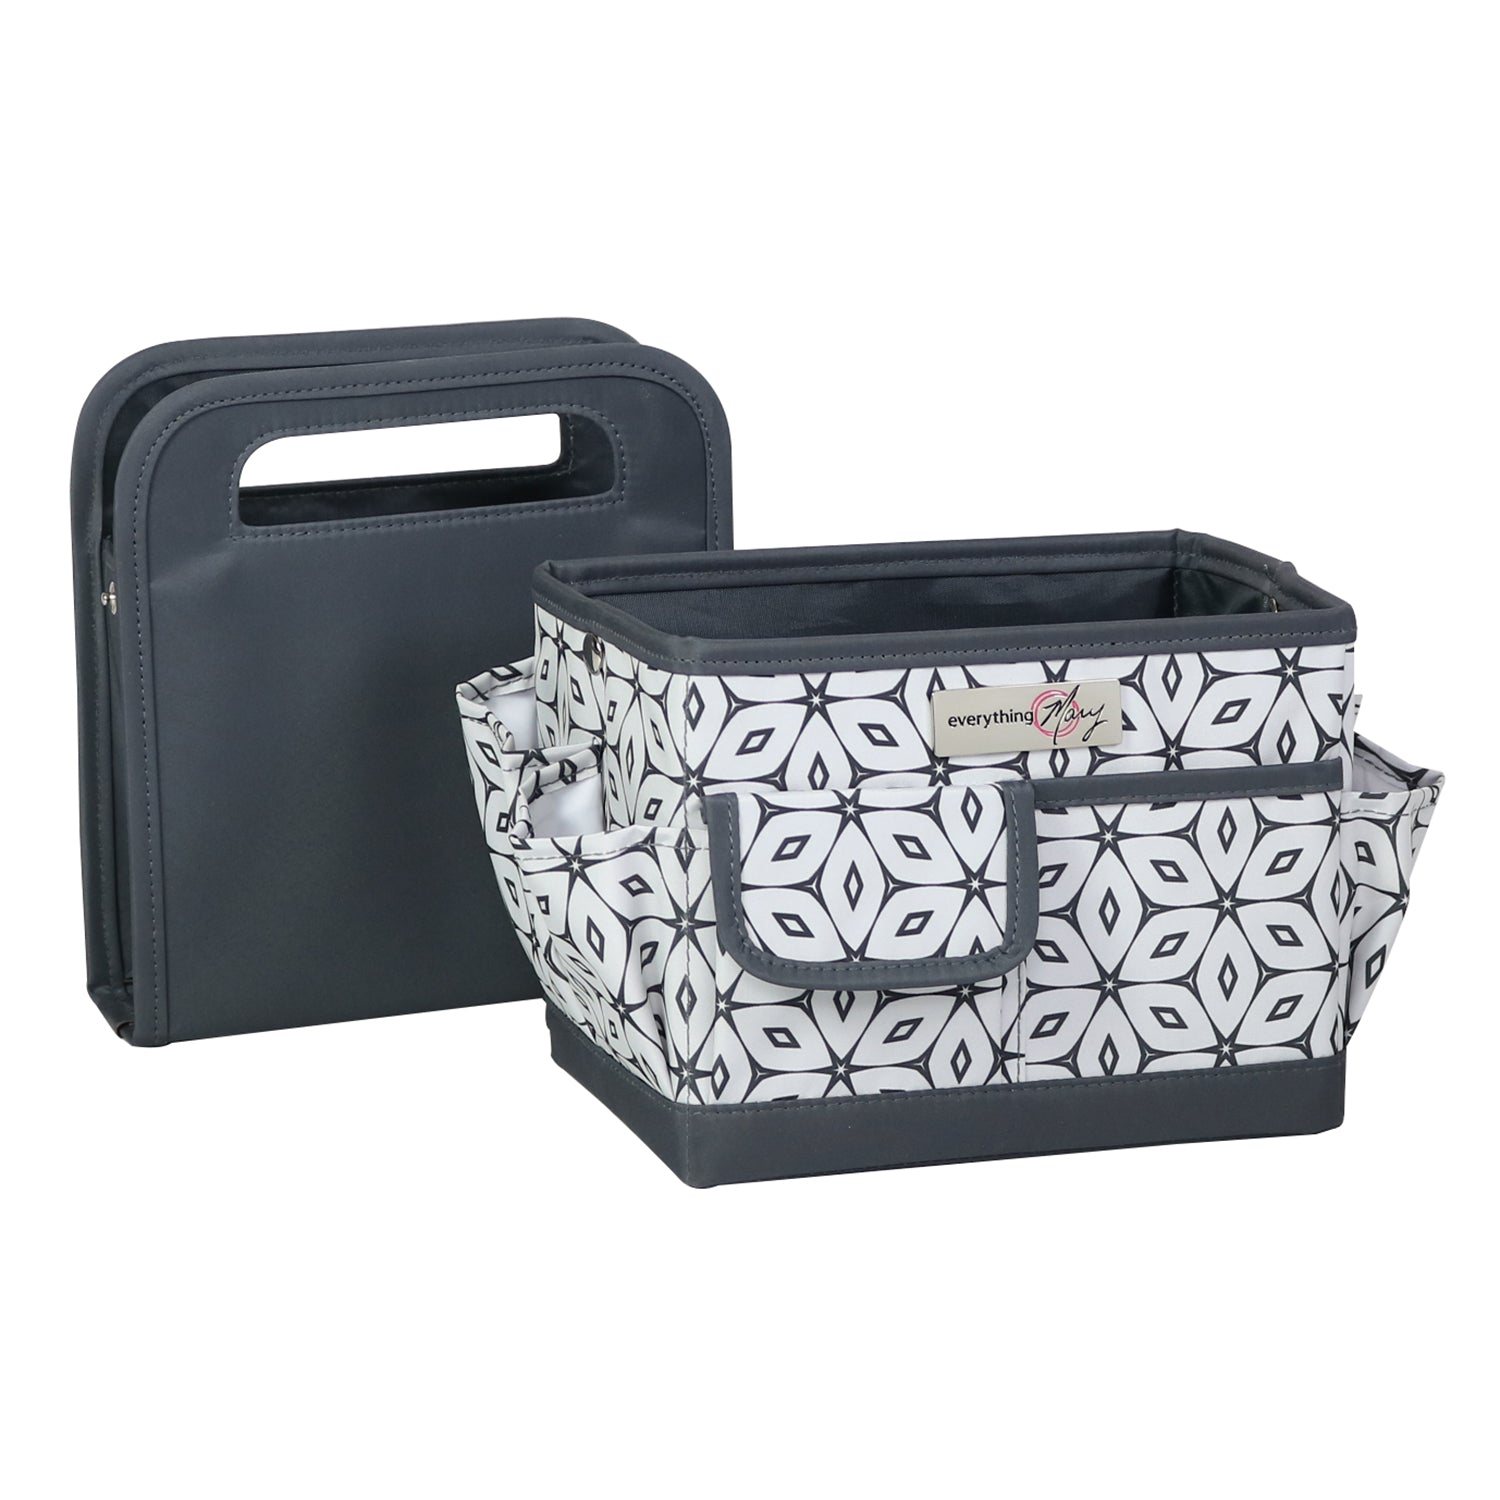 Best Craft Supply Caddy for Storing Materials –